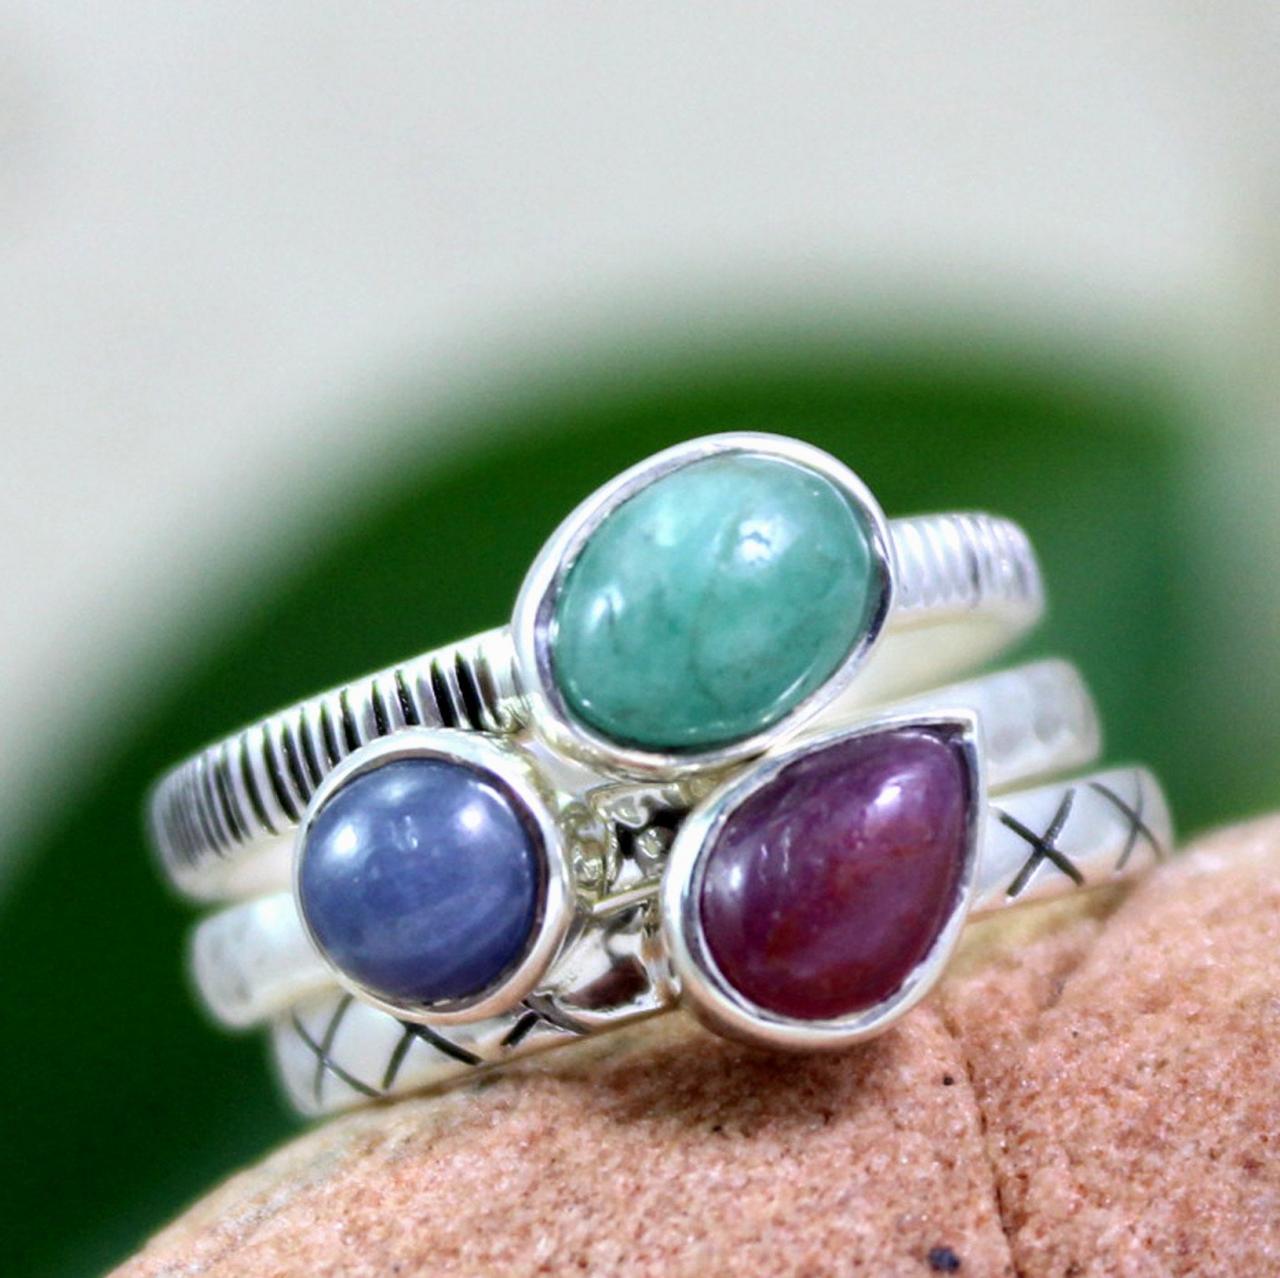 Real Ruby,emerald,sapphire Stacking Rings,engagement Ring,anniversary Gift Ring,925 Sterling Silver Jewelry,anniversary Gift, Proposal Ring.